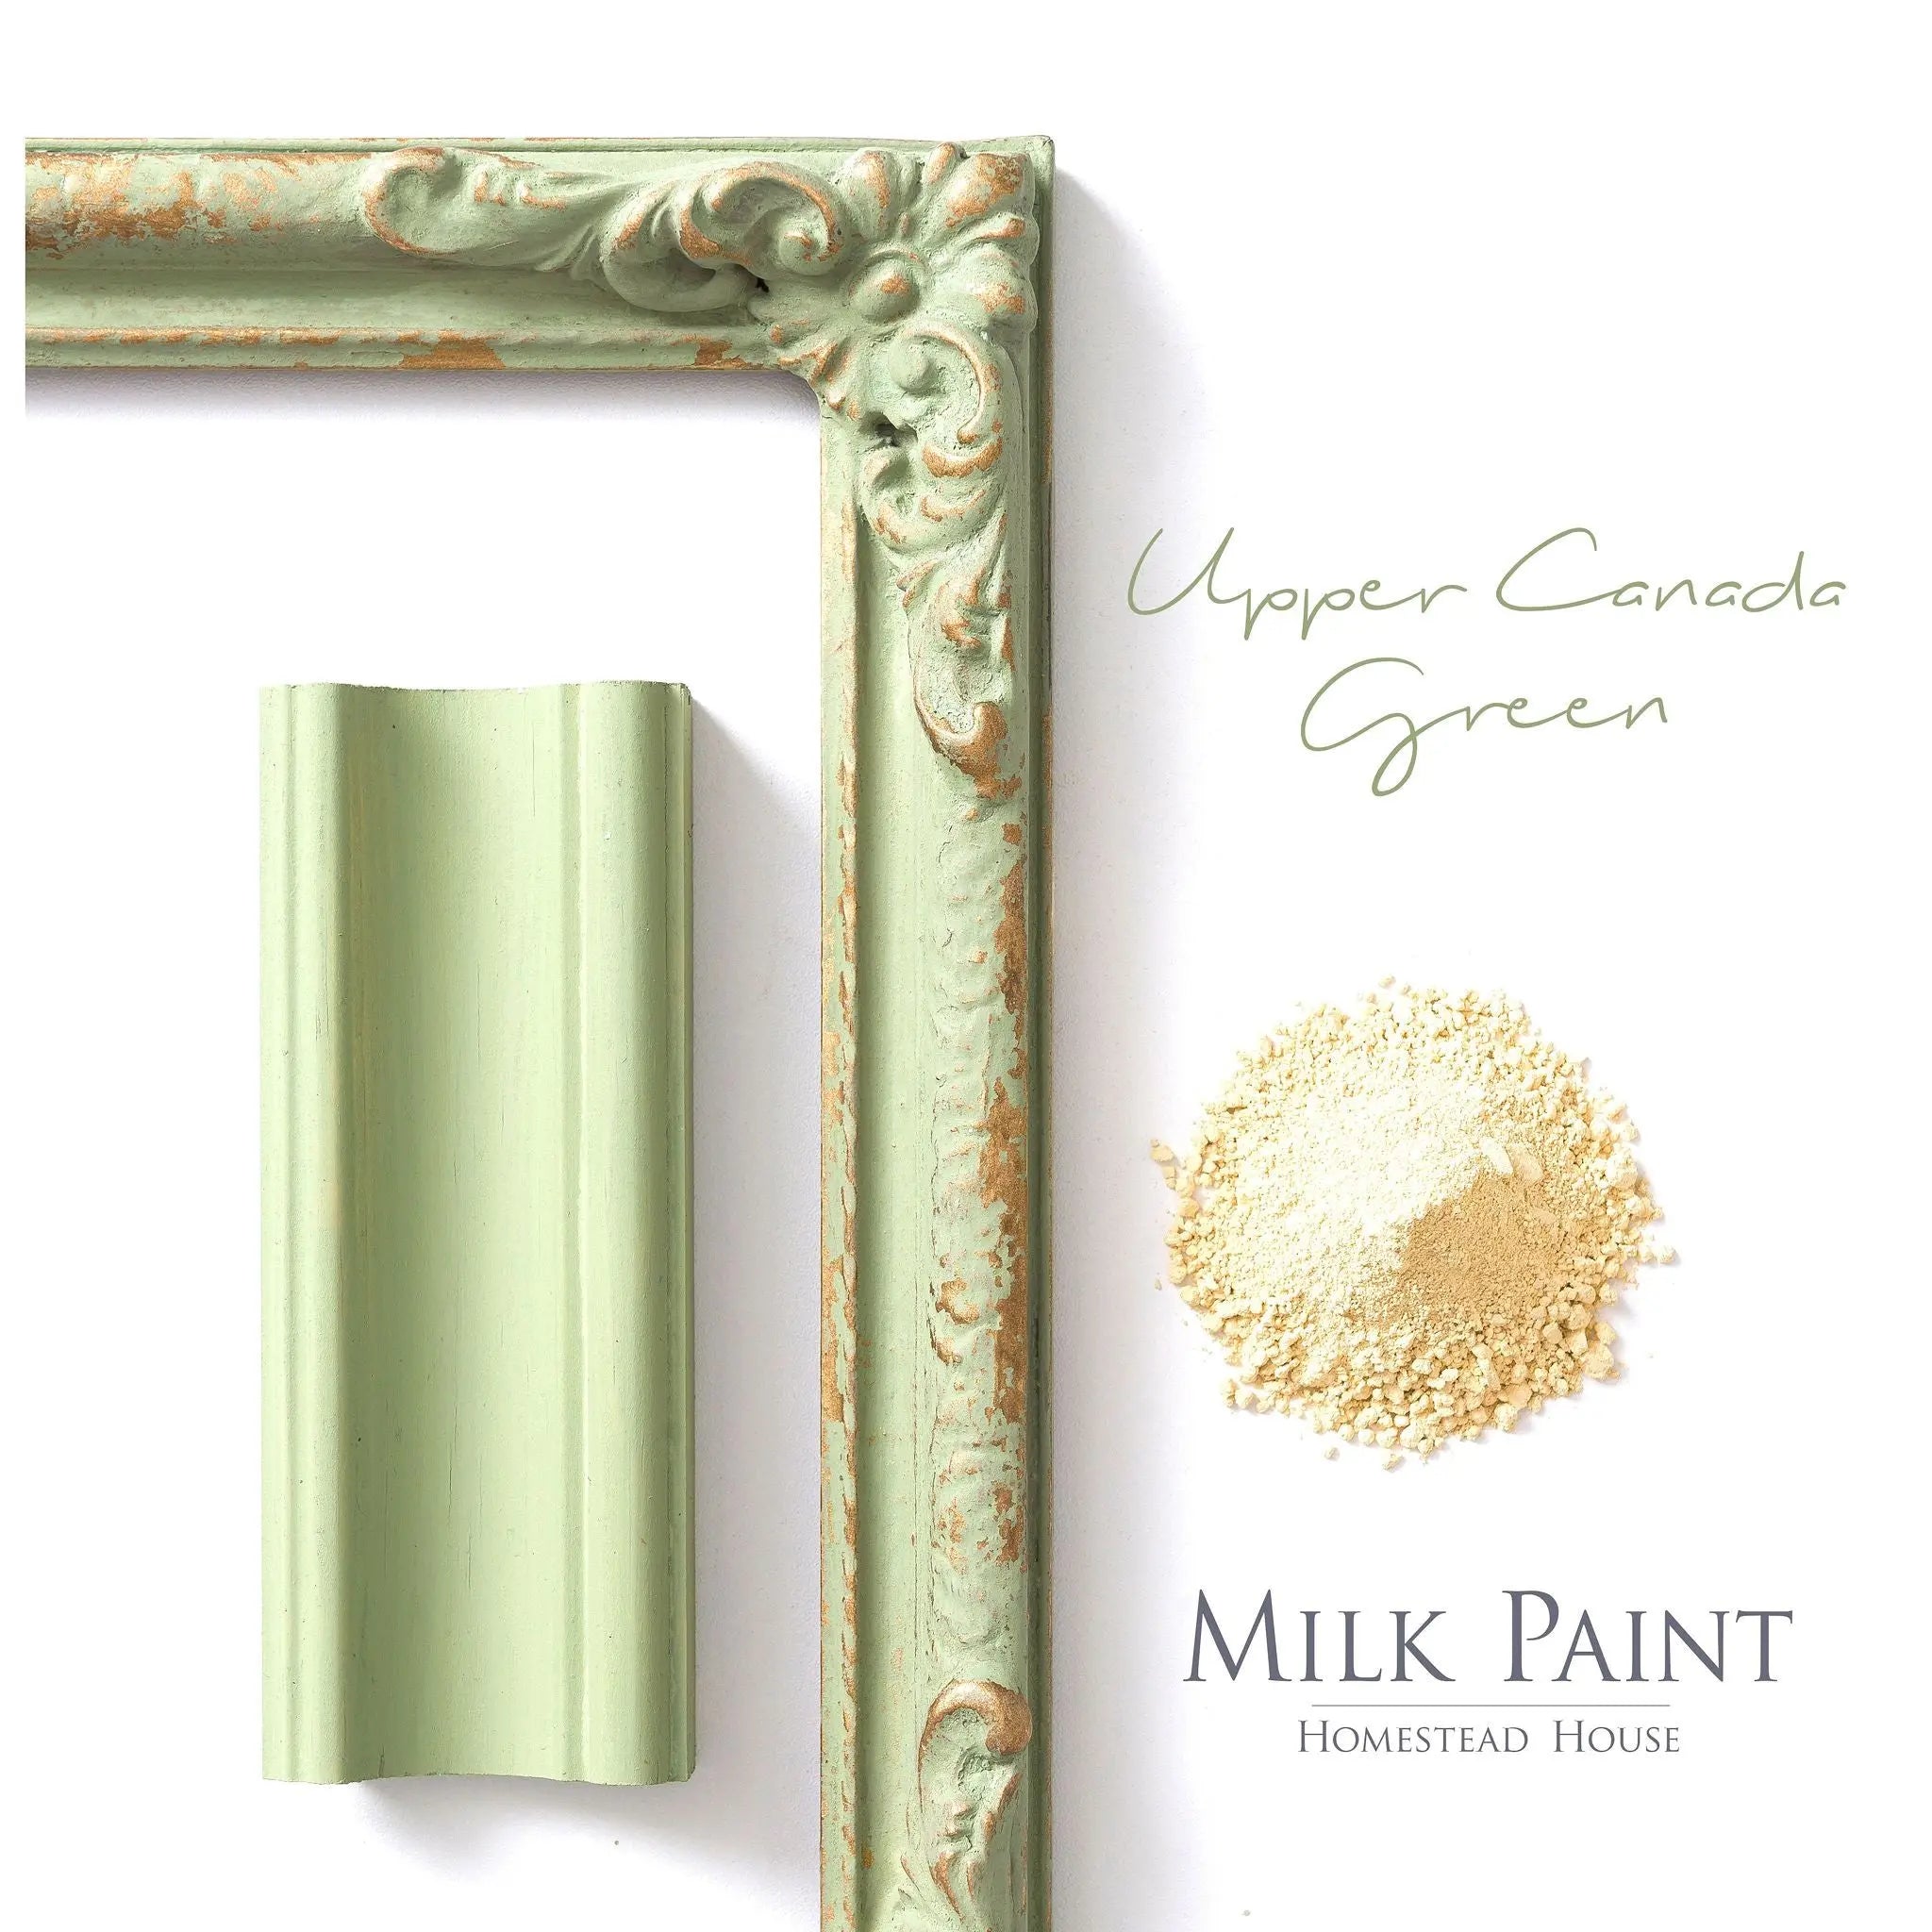 Homestead House Milk Paint - Upper Canada Green - Home Smith